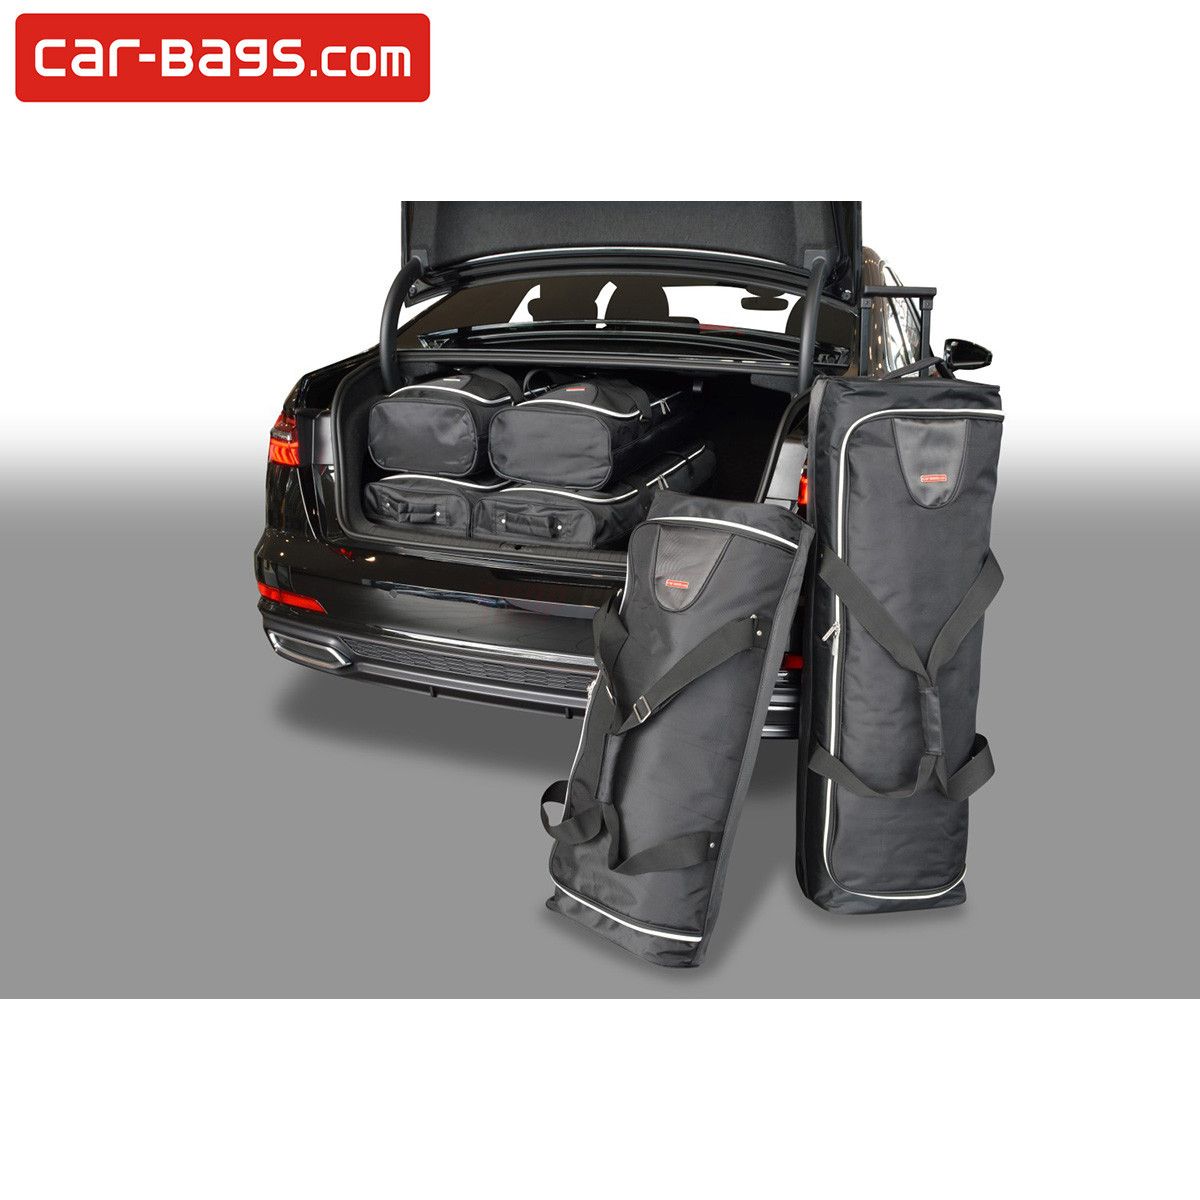 Travel bags fits Audi A6 (C8) tailor made (6 bags), Time and space saving  for € 379, Perfect fit Car Bags